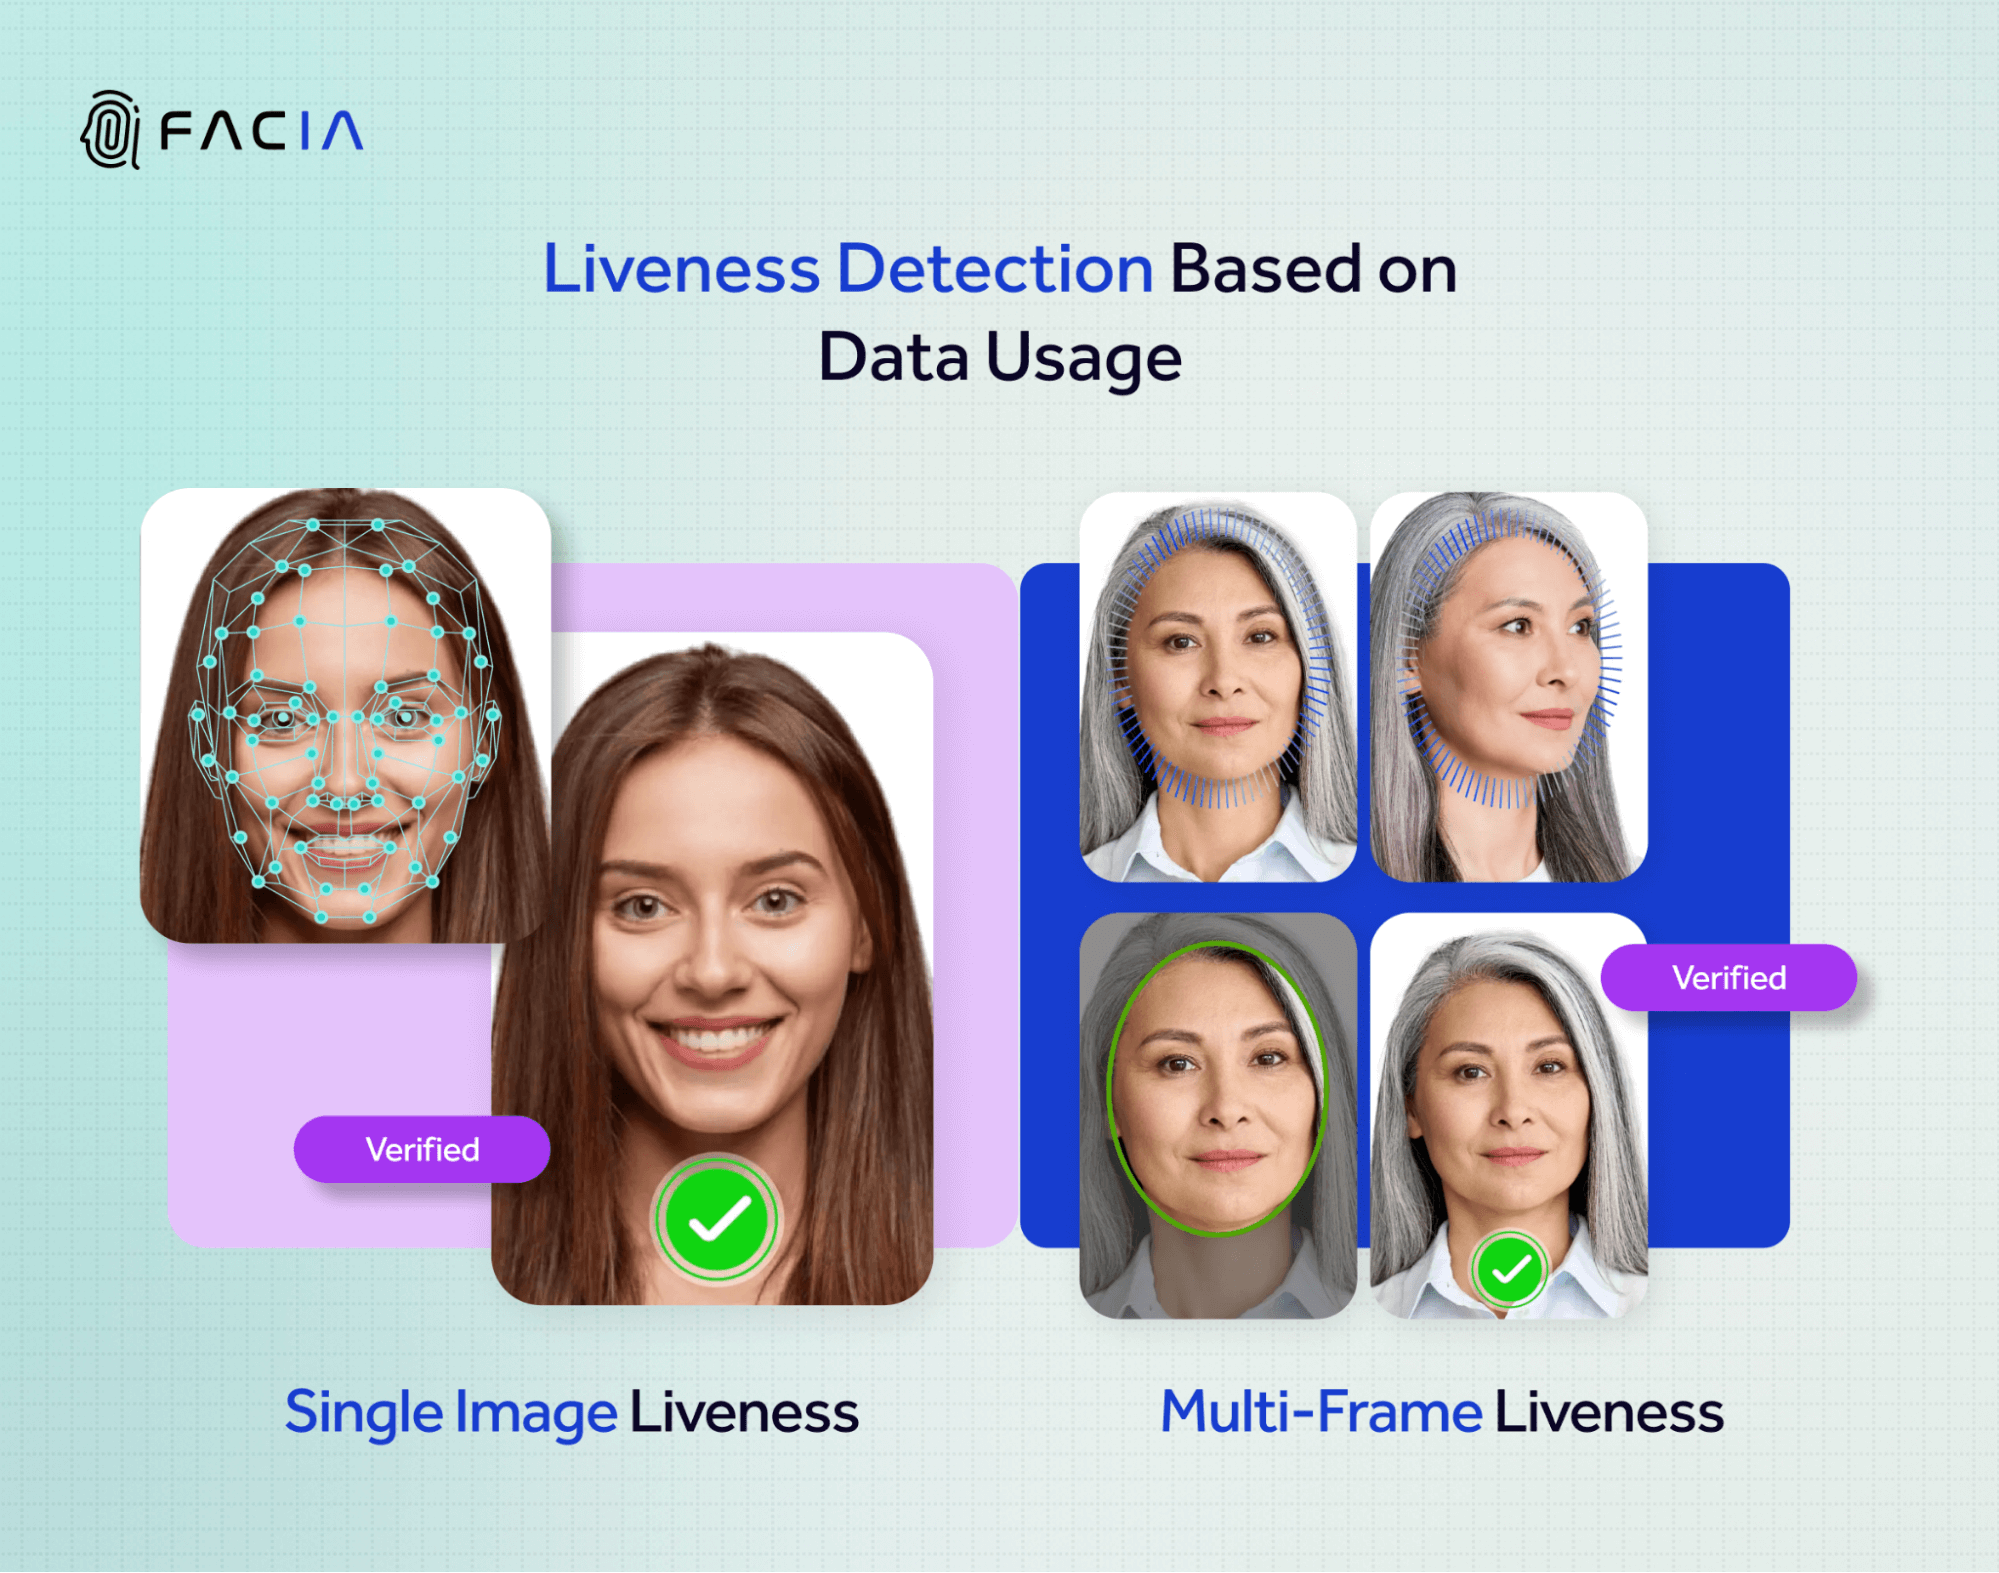 This infographic shows the single image & multi-frame liveness detection authenticating users based on the data used.